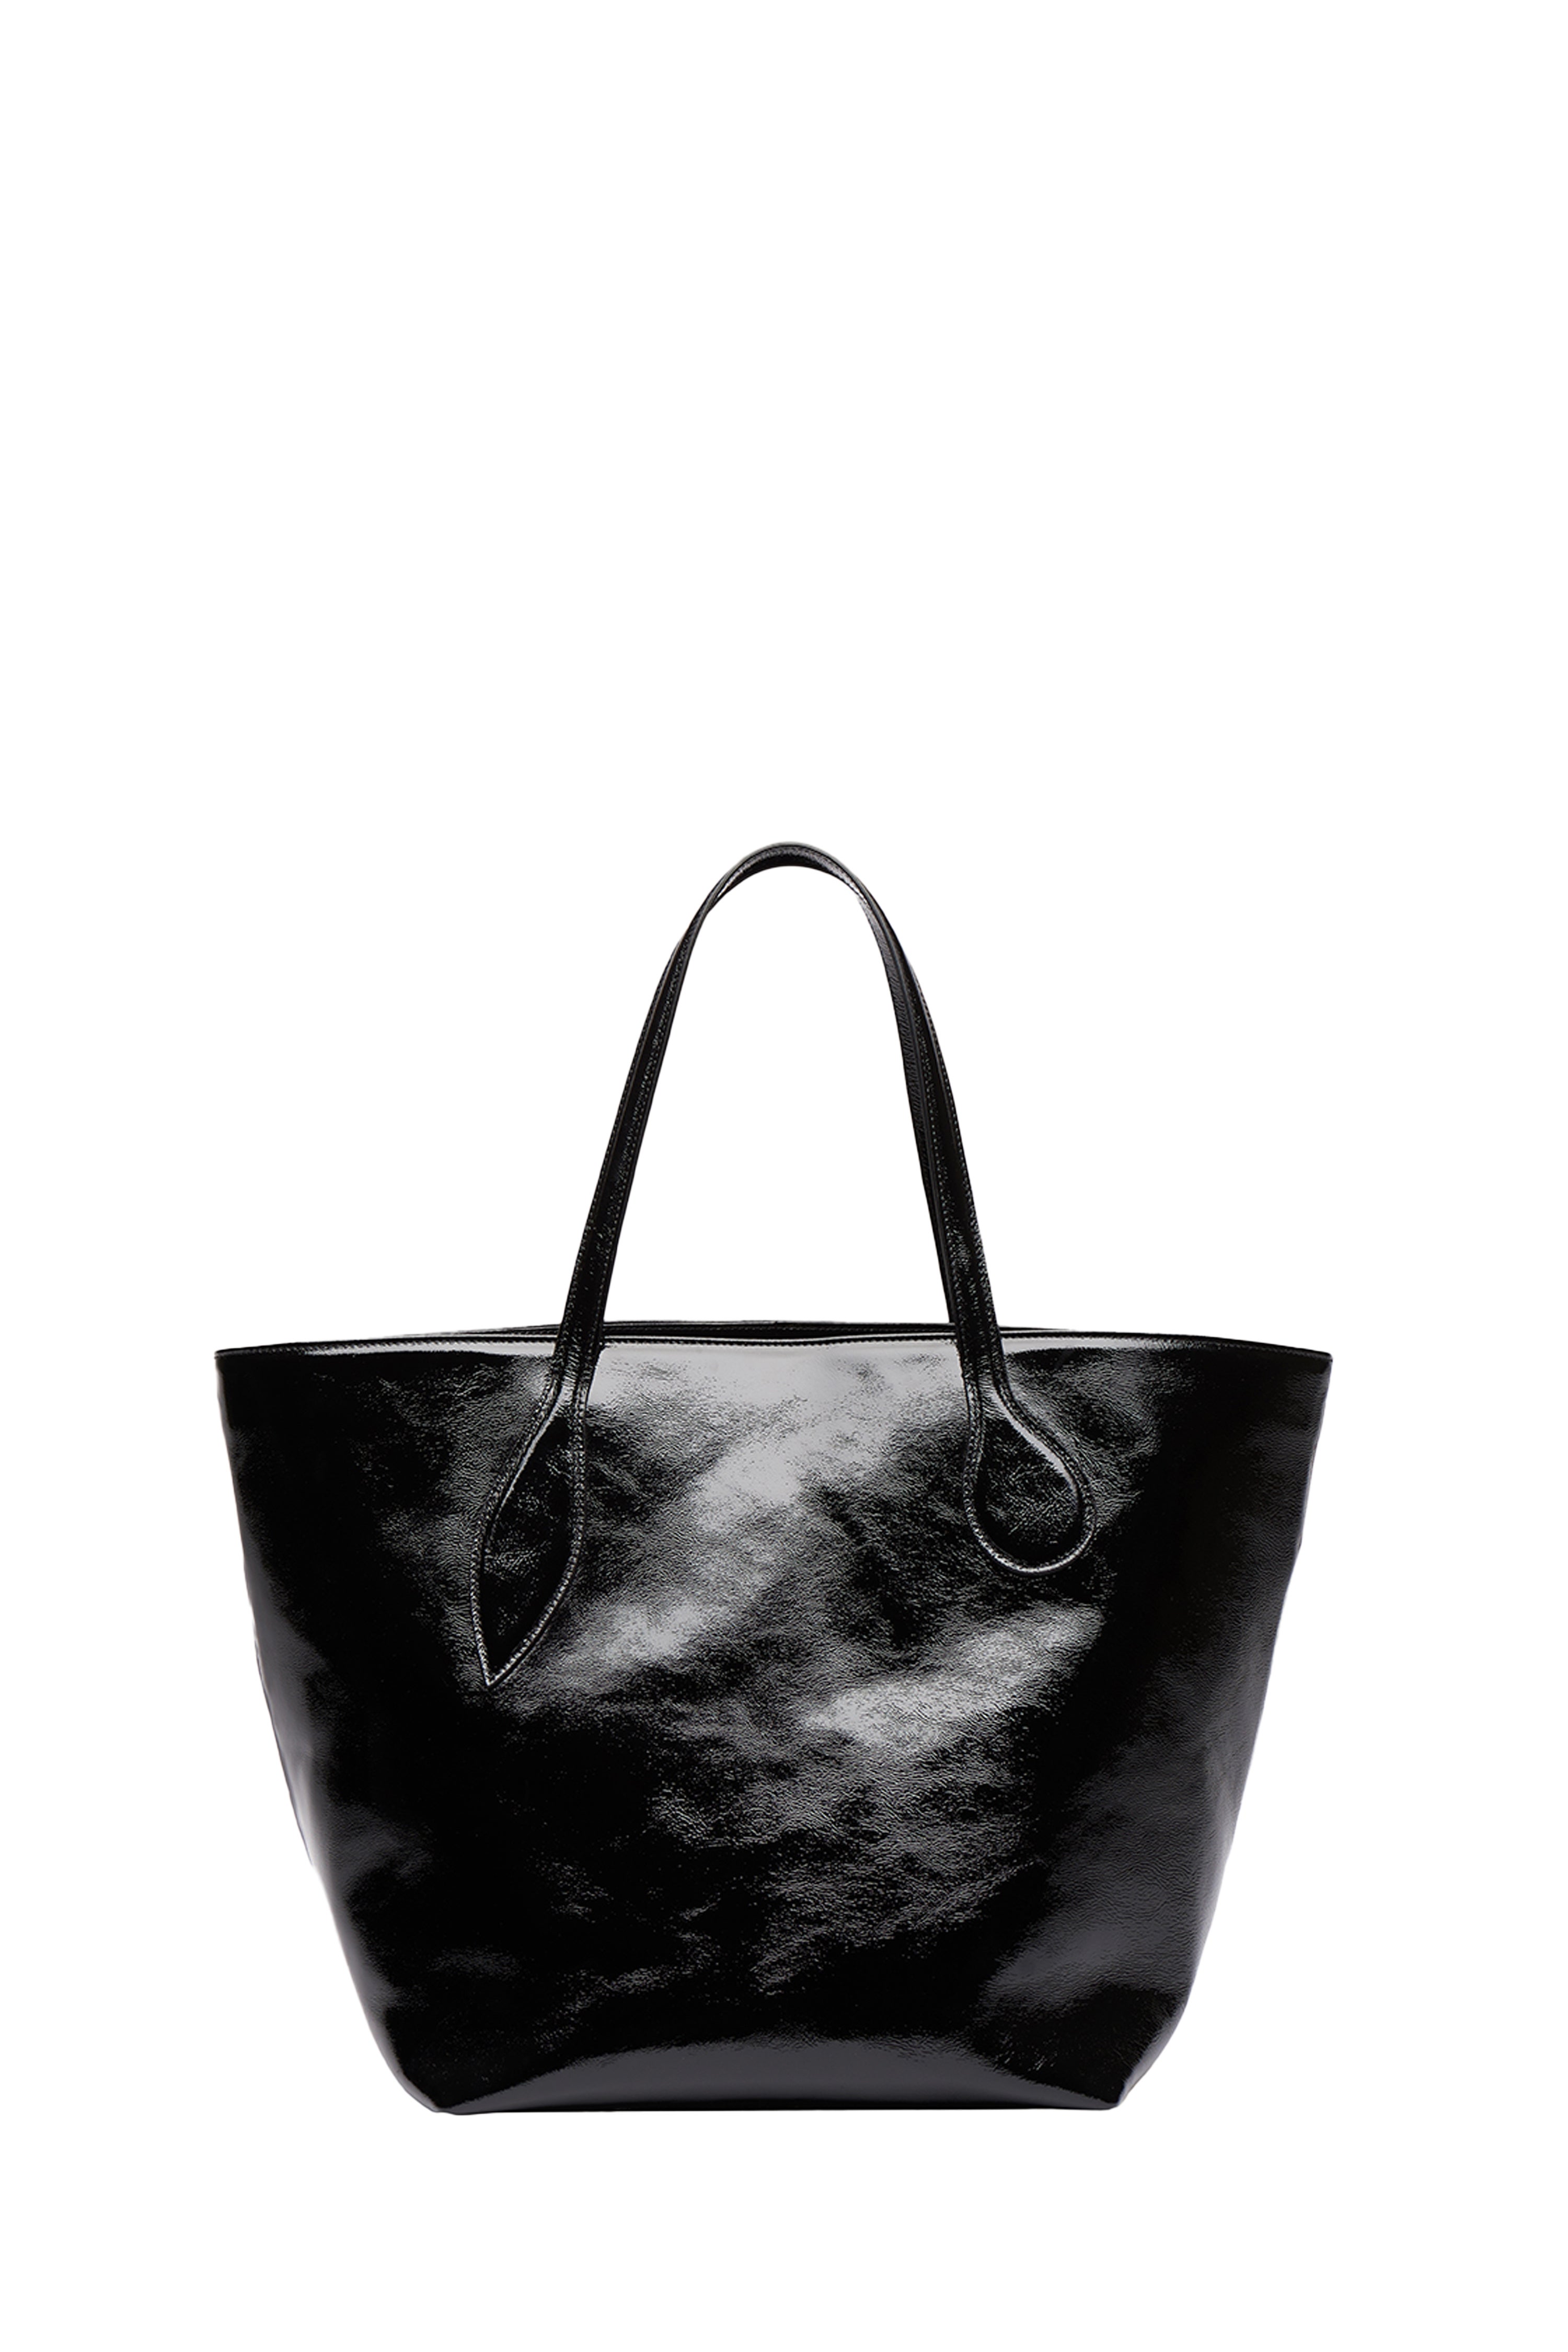 Tote bag in black naplack, the perfed tote